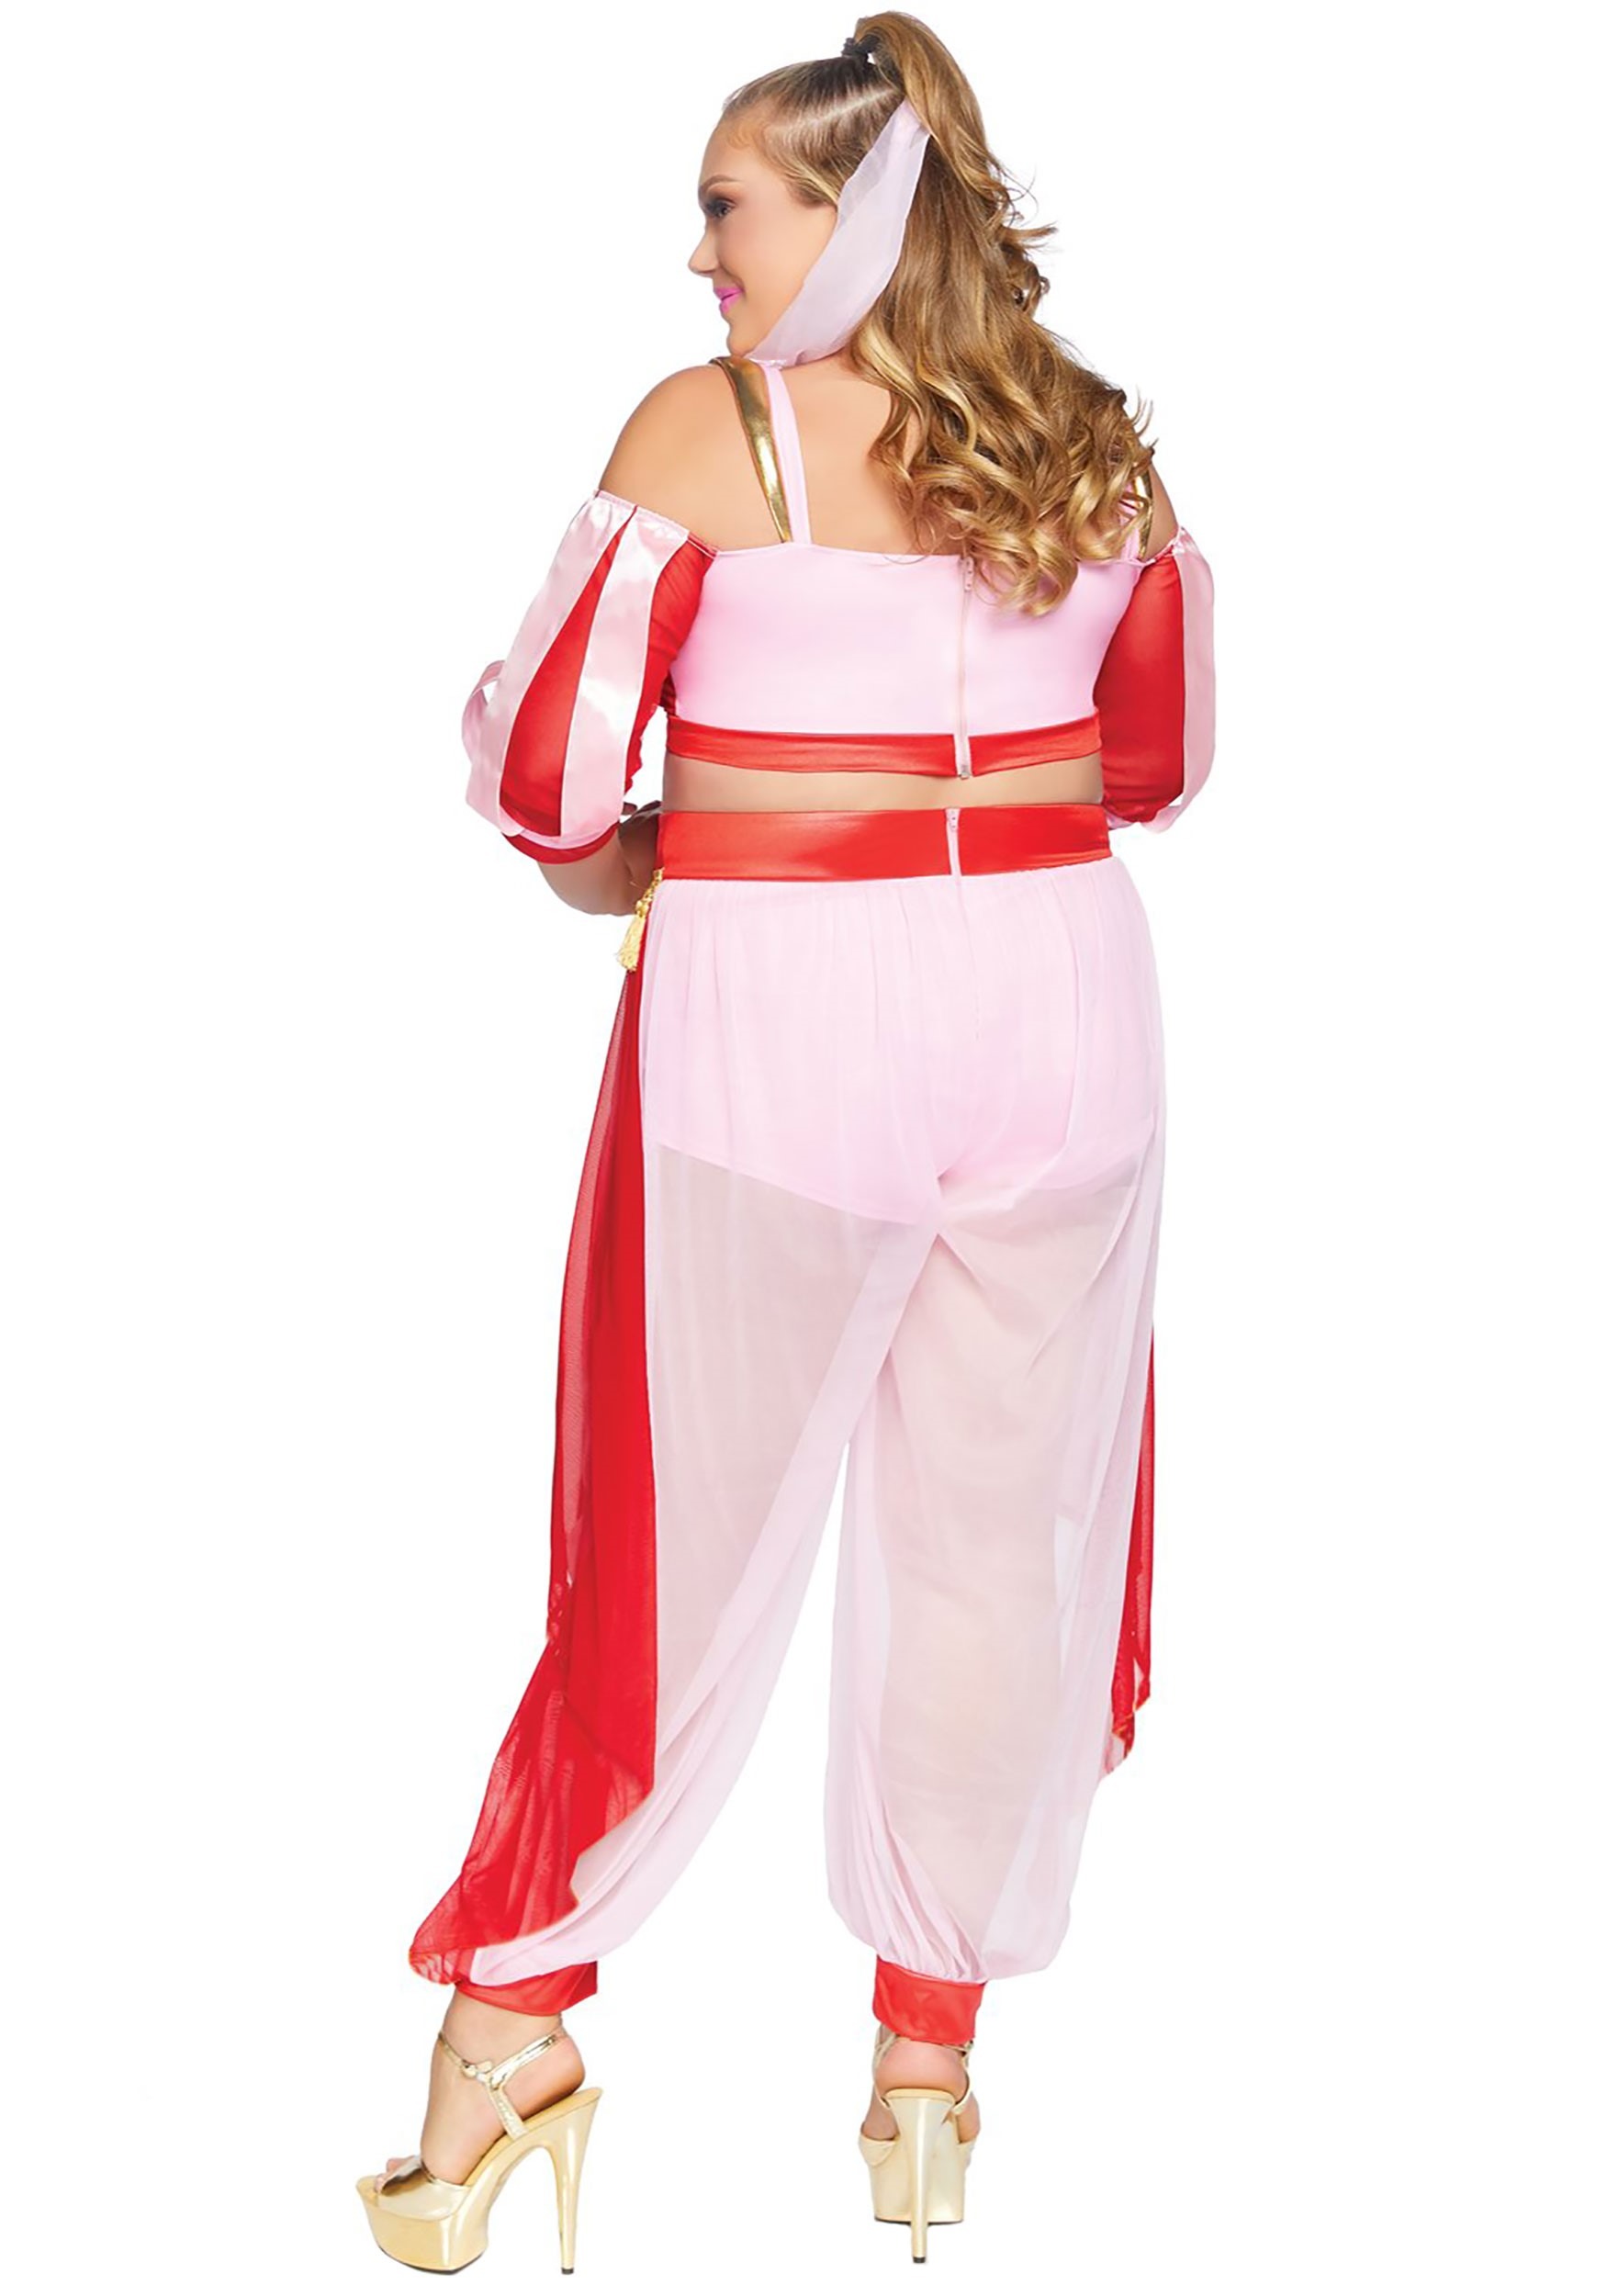 Plus Size Dreamy Genie Costume For Adults 